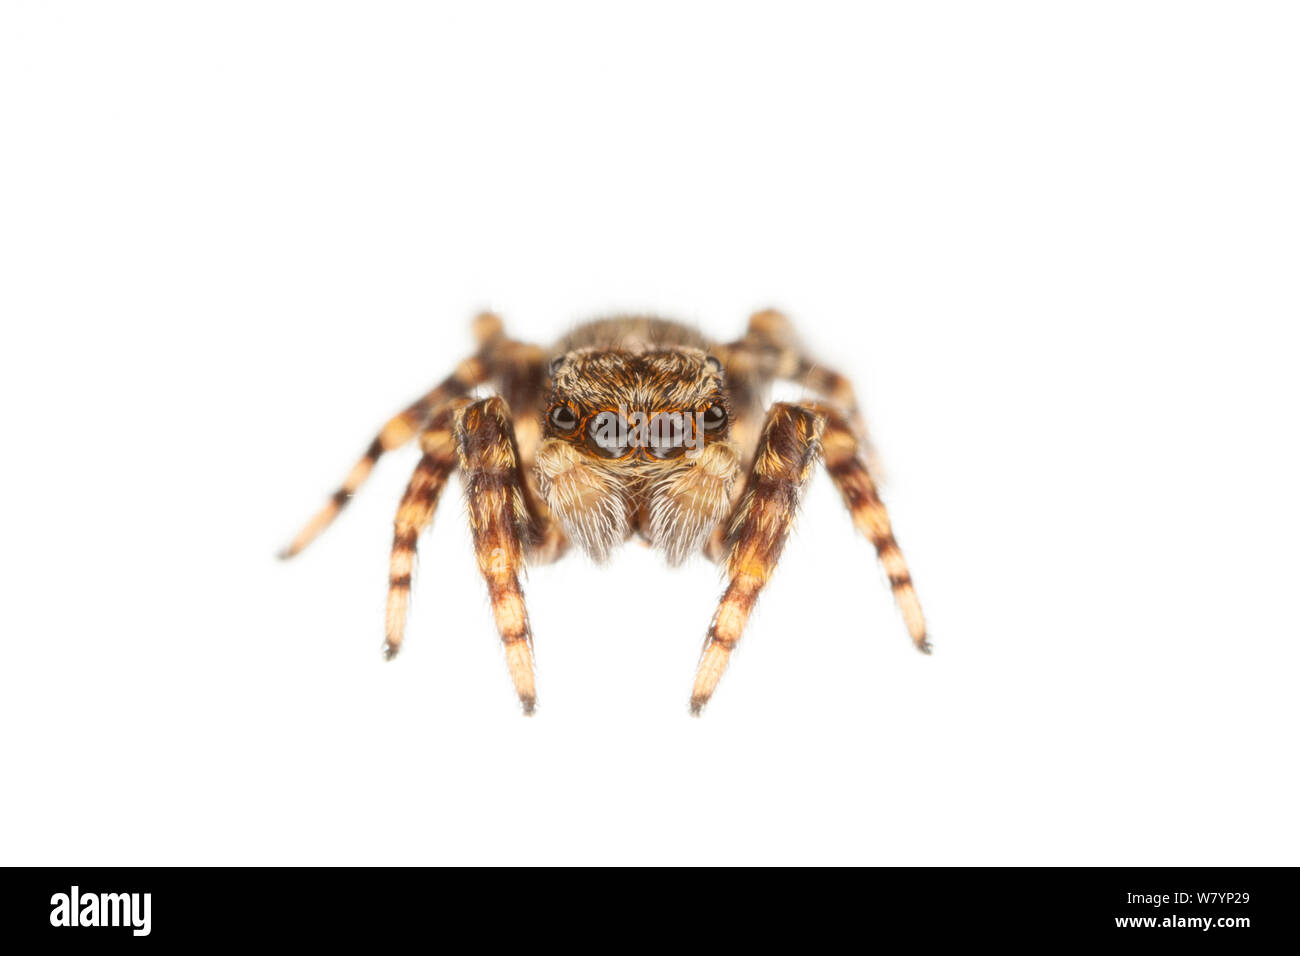 Jumping spider (Pseudeuophrys erratica) juvenile male, Maine-et-Loire, France, September. meetyourneighbours.net project Stock Photo